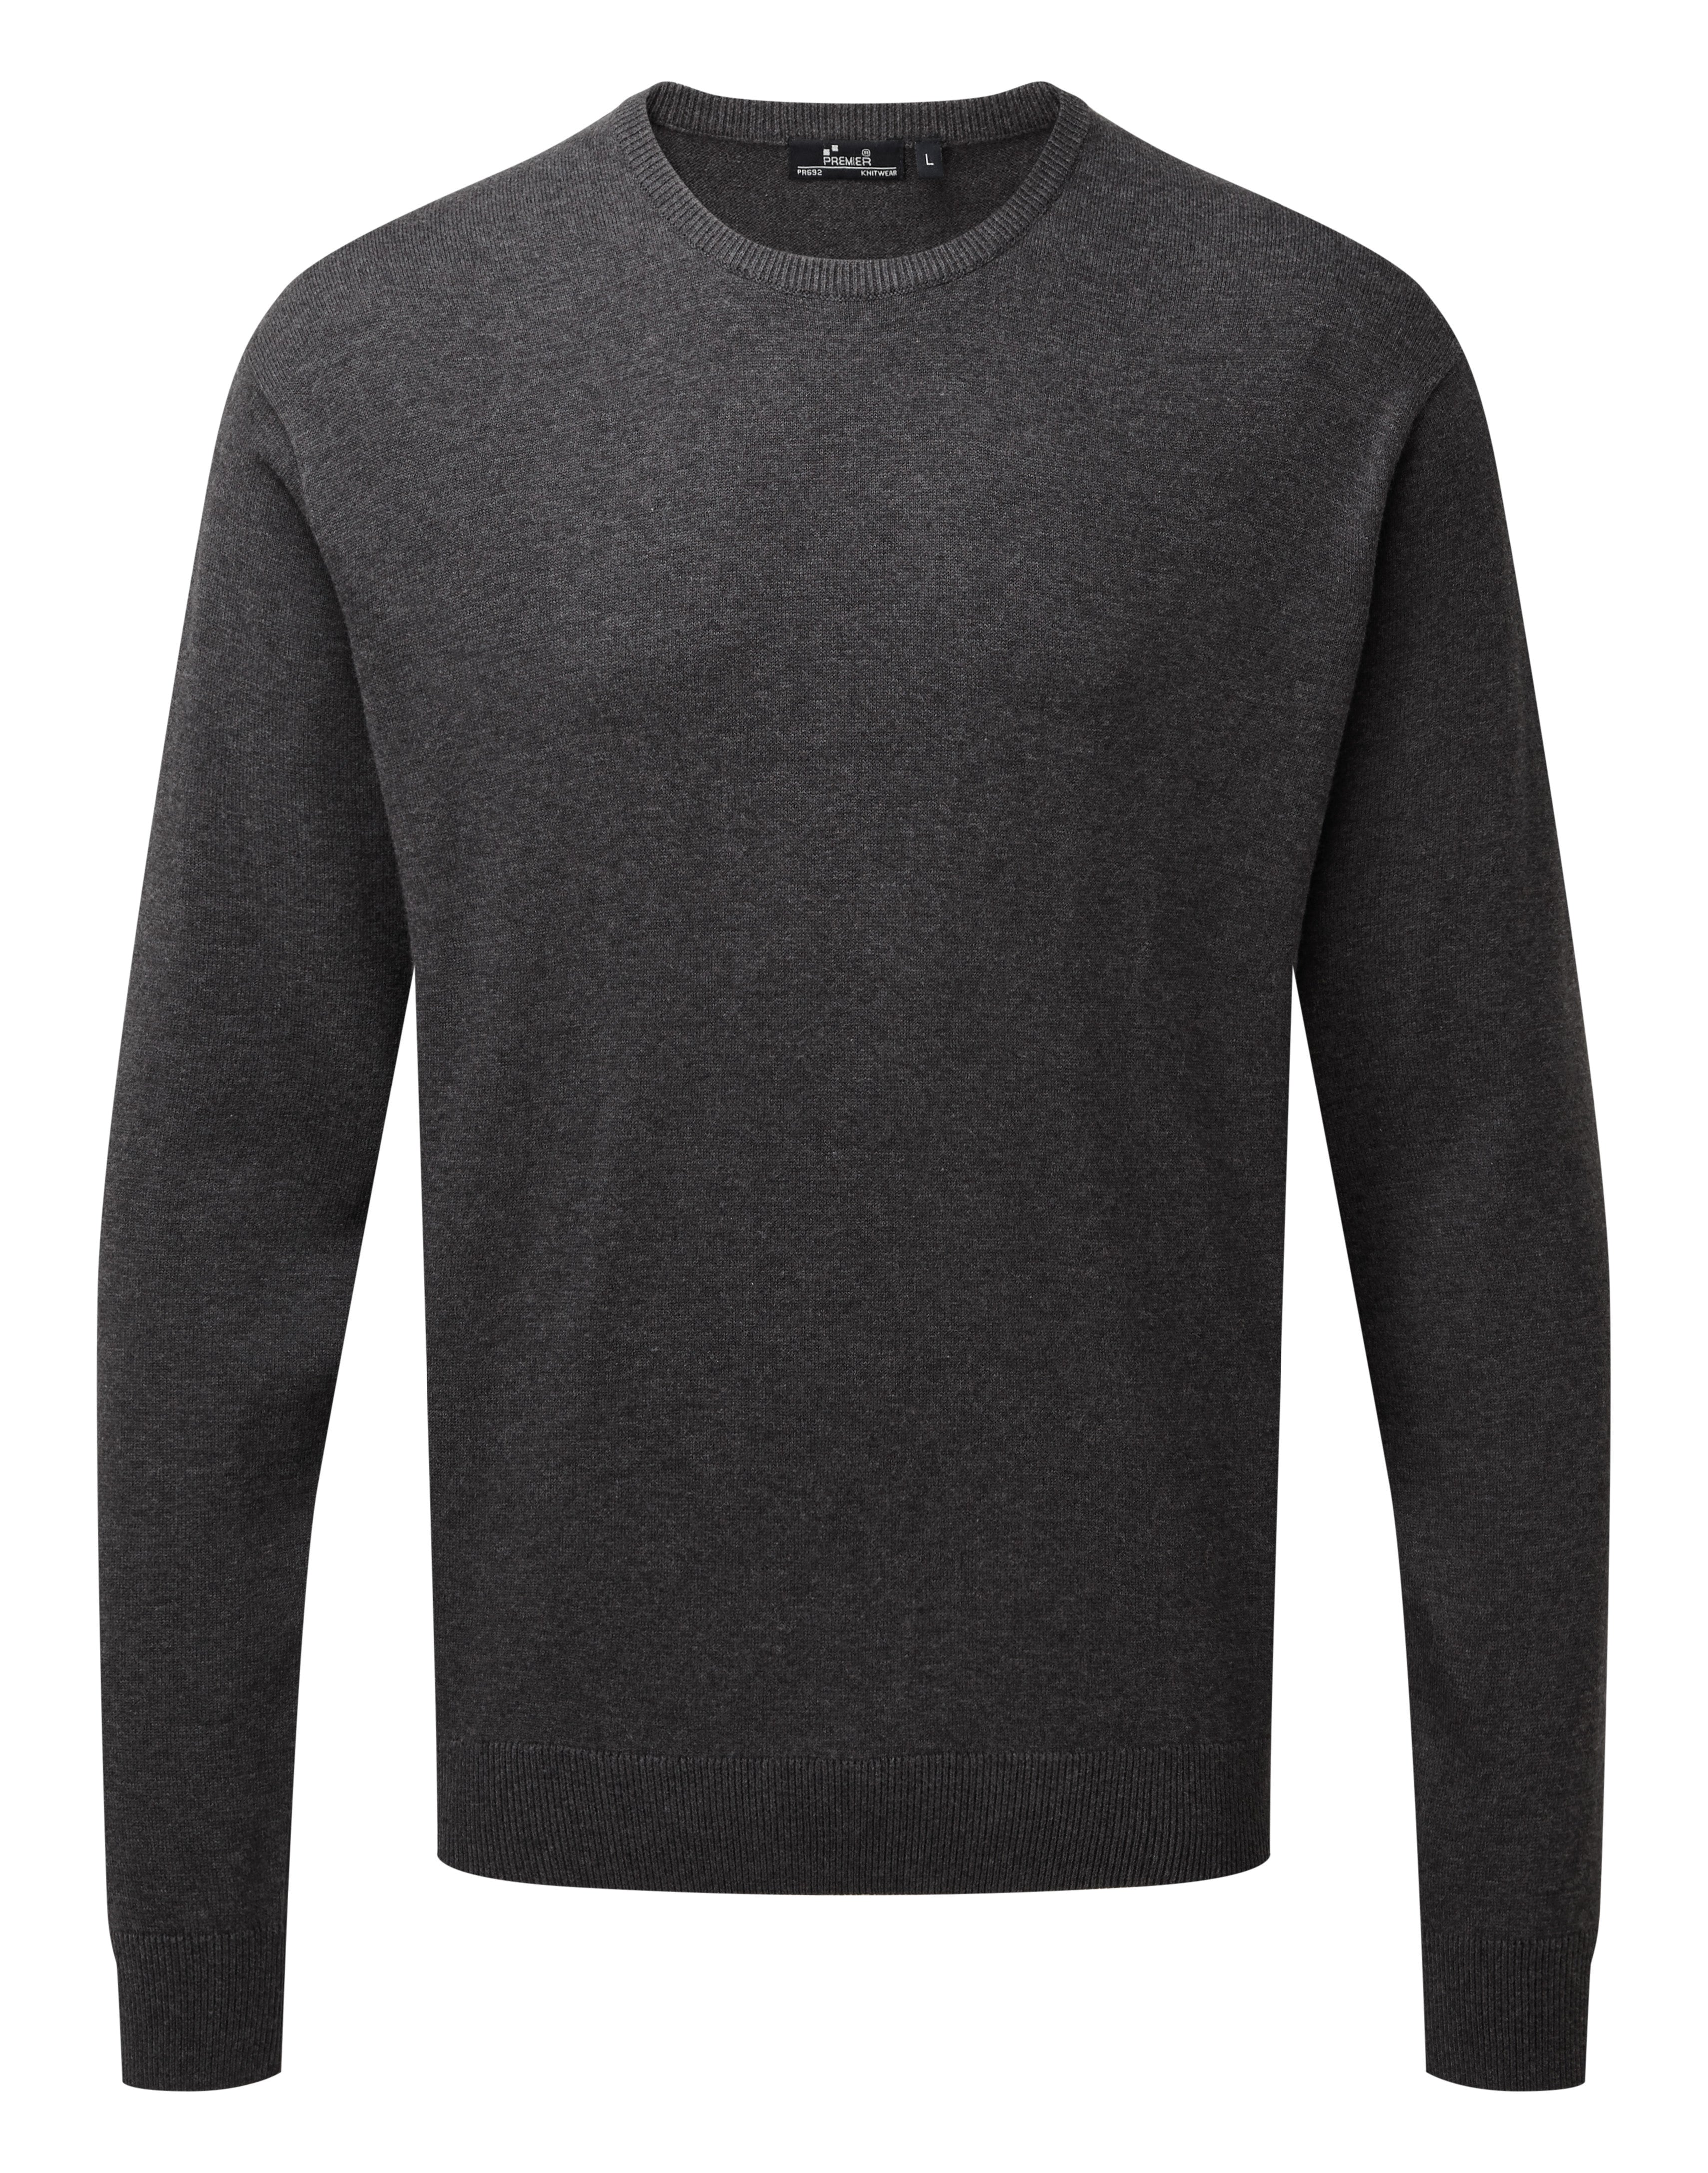 Crew neck cotton-rich knitted sweater- Premier Collection